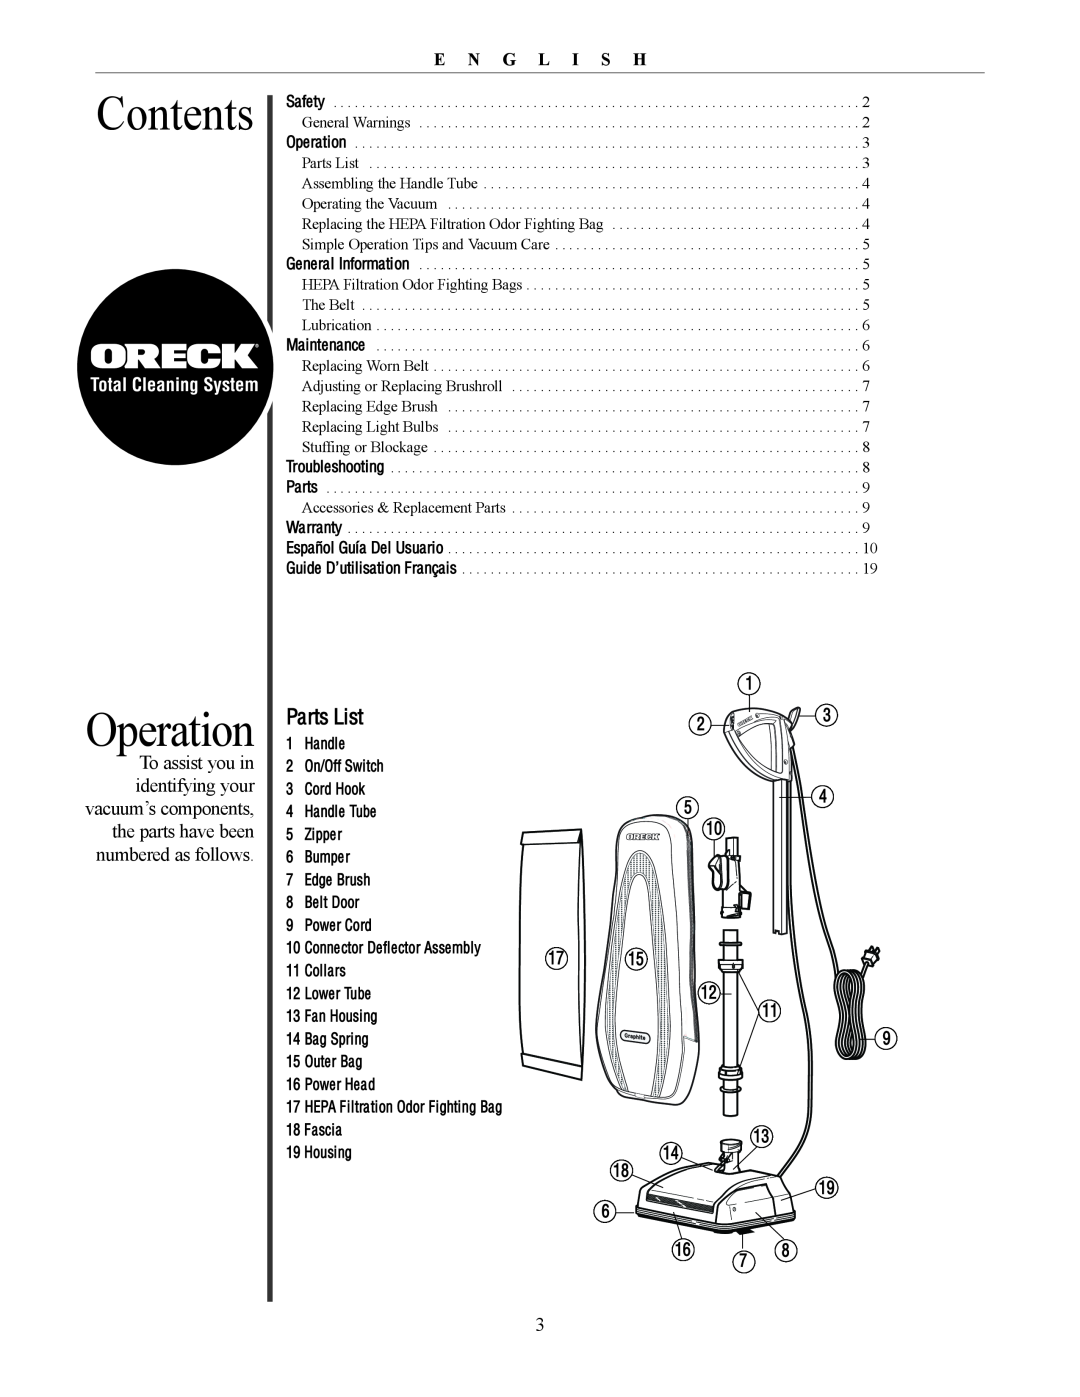 Oreck U4300 manual Contents, Operation, E N G L I S H, Total Cleaning System 